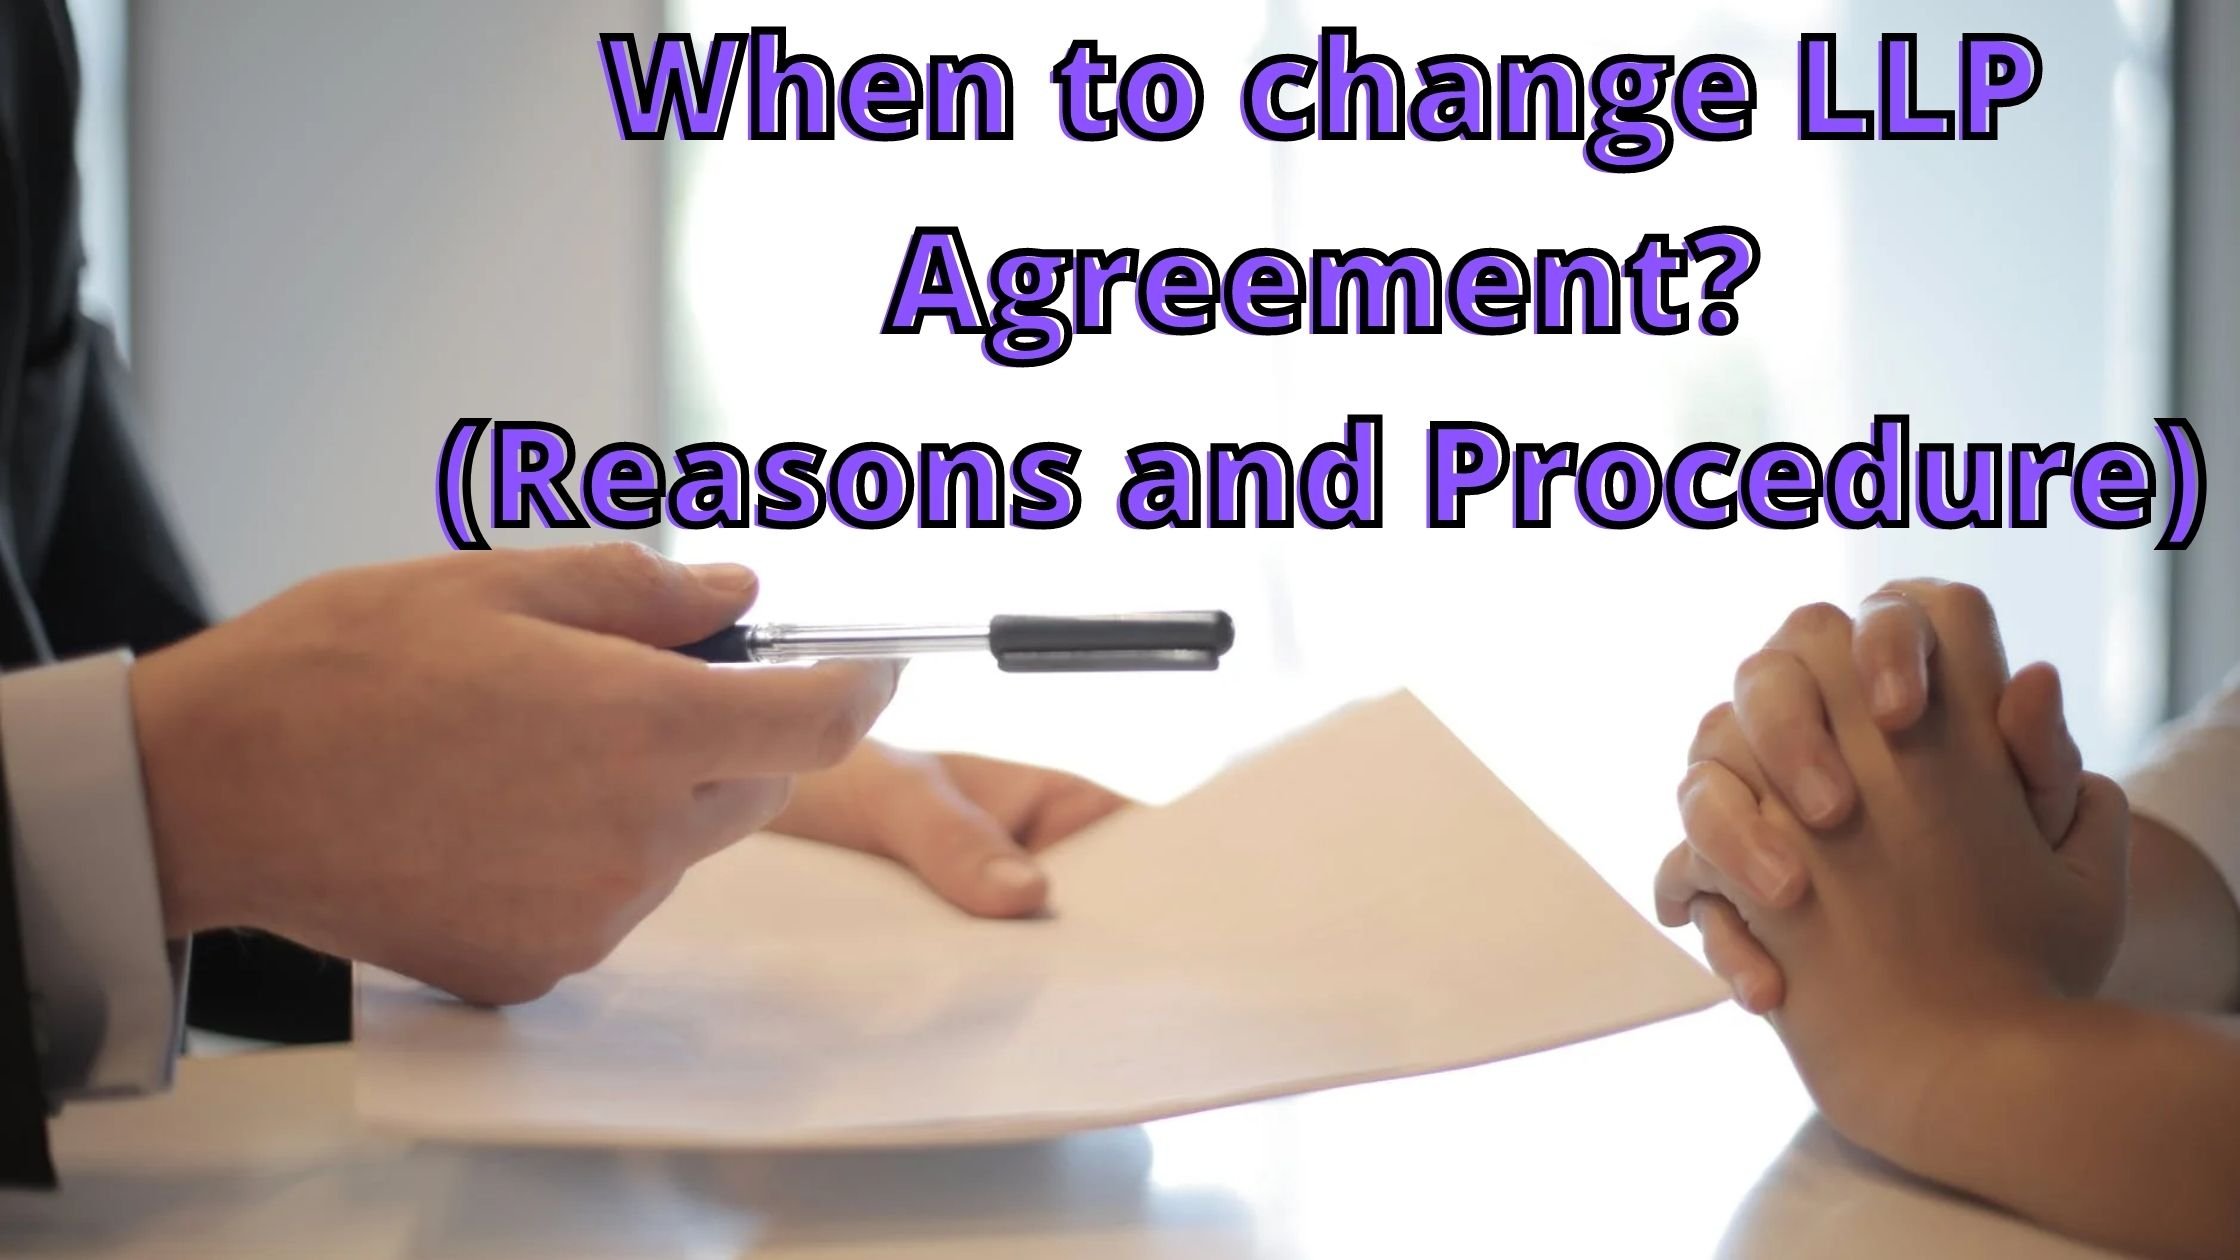 When to change the LLP Agreement? Know Reasons and Procedure